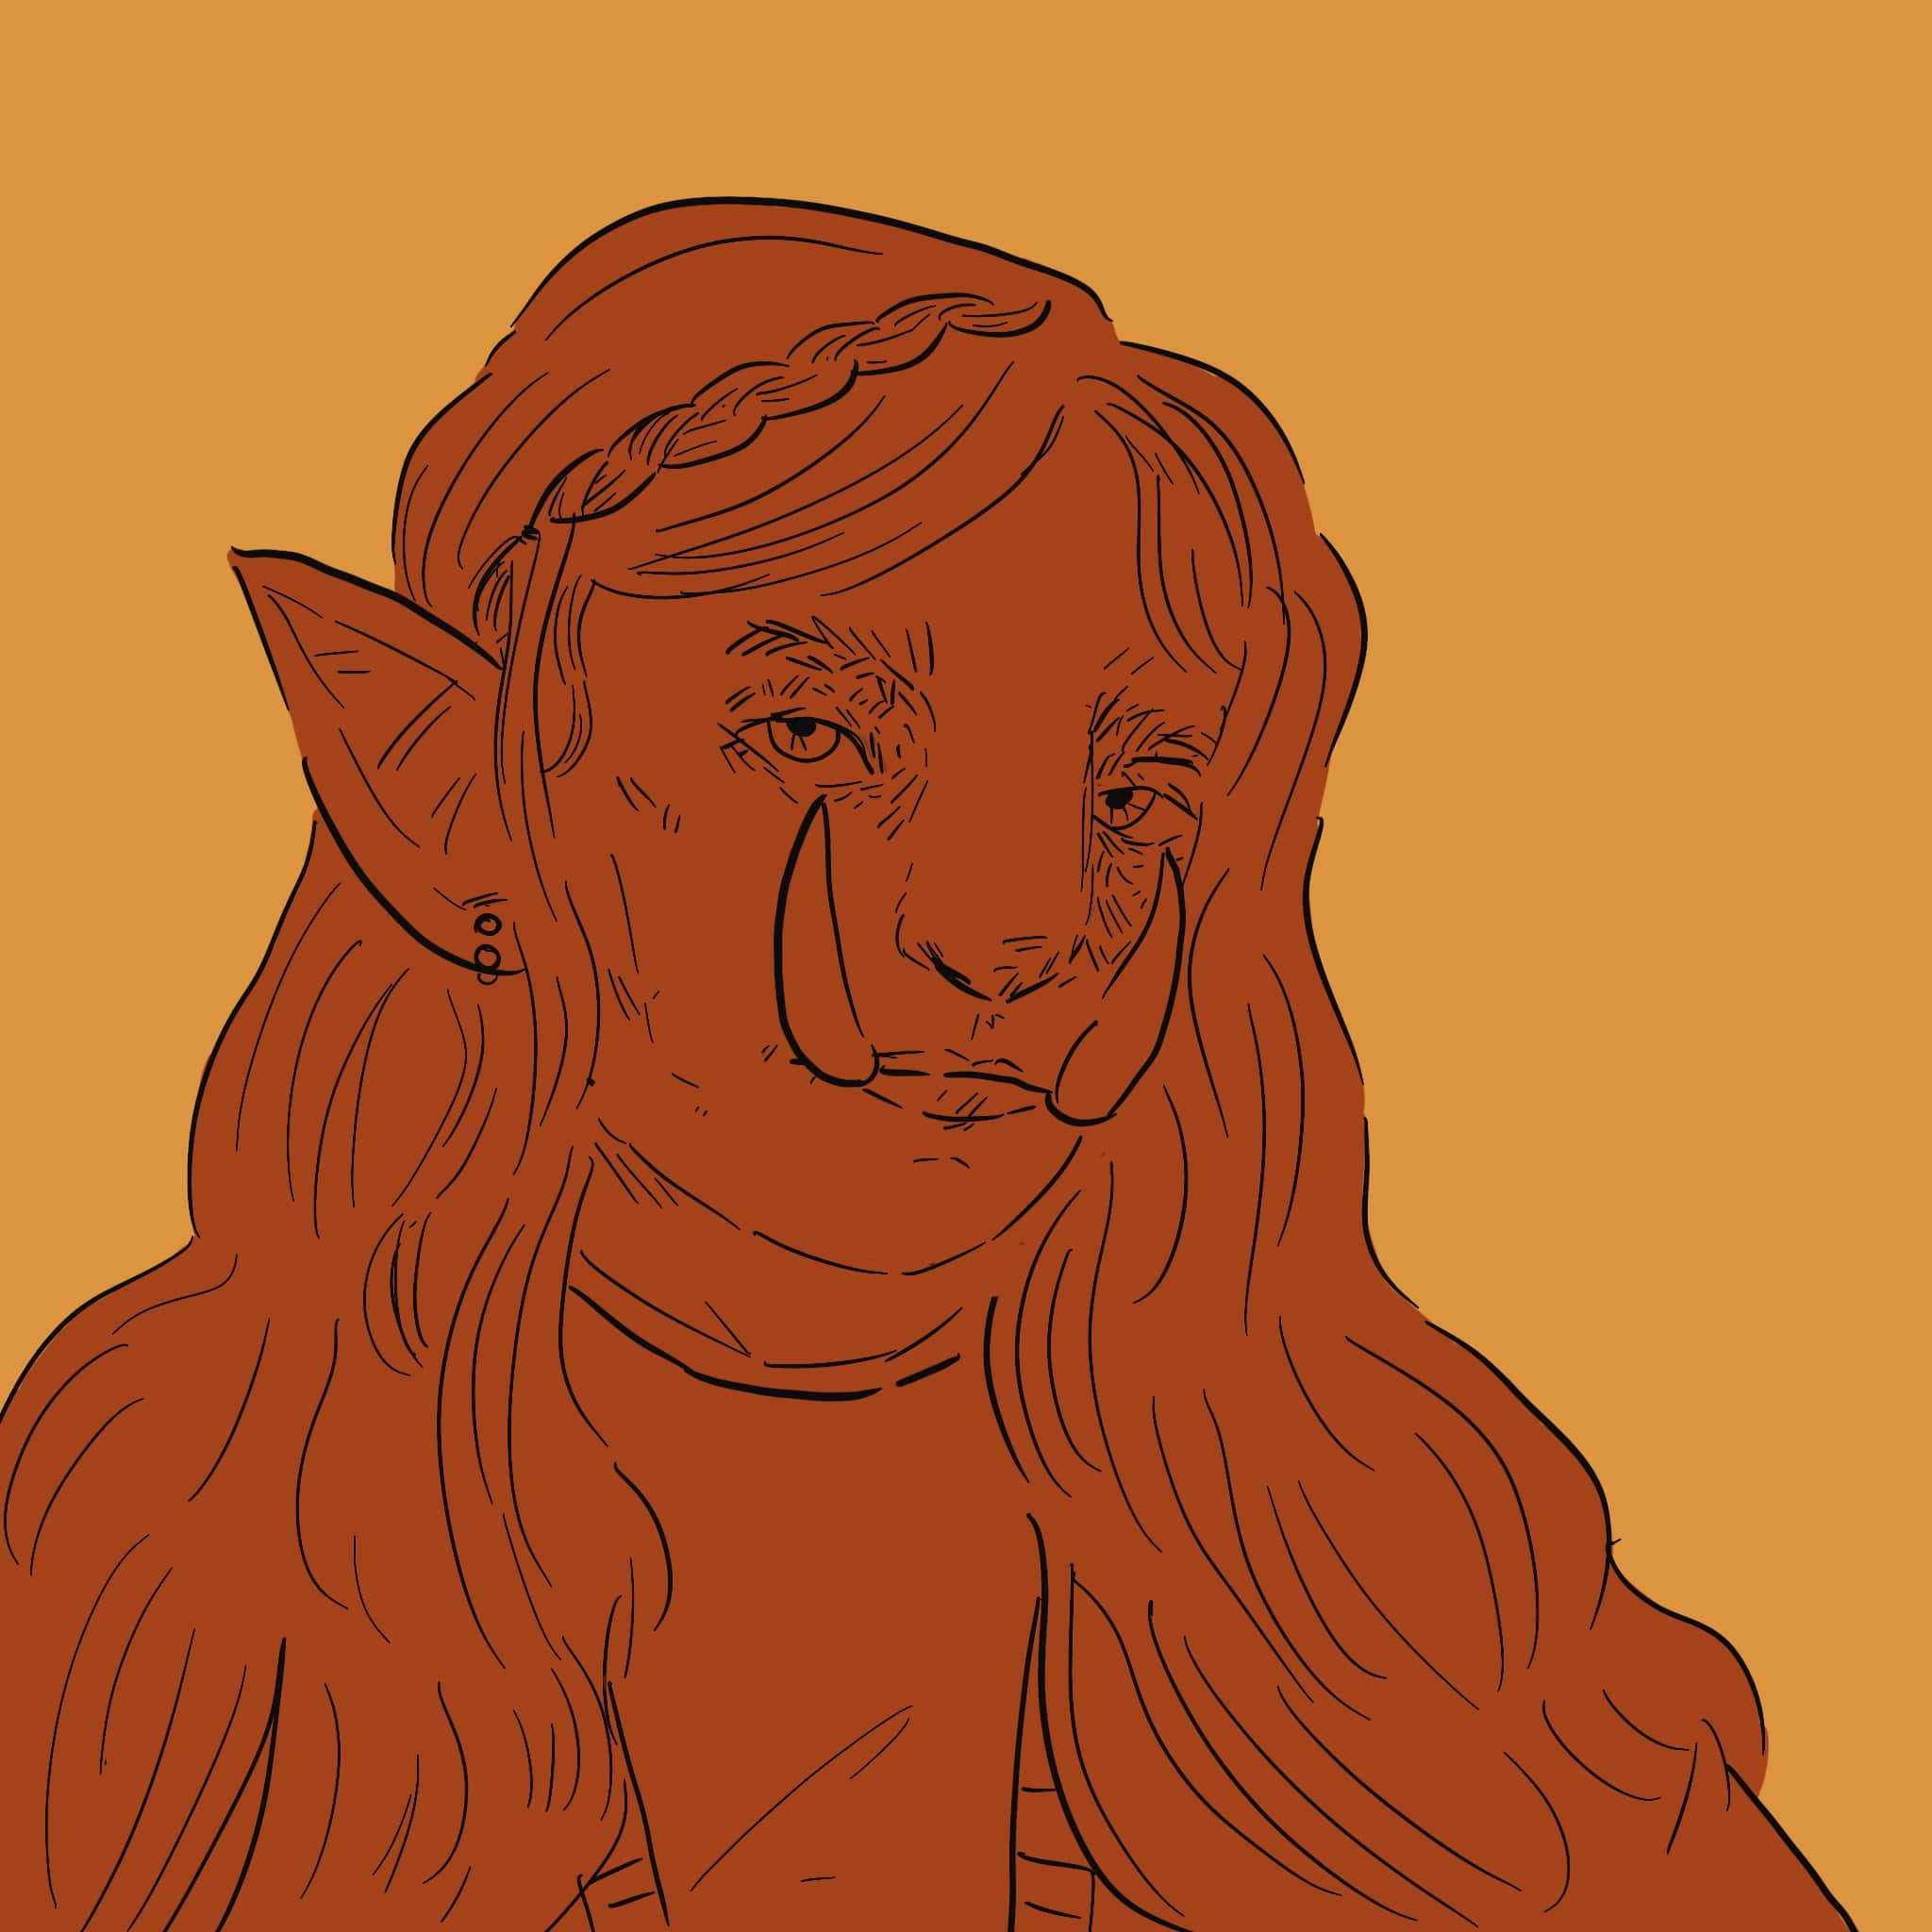 A digital painting of an orange orc against a yellow background.